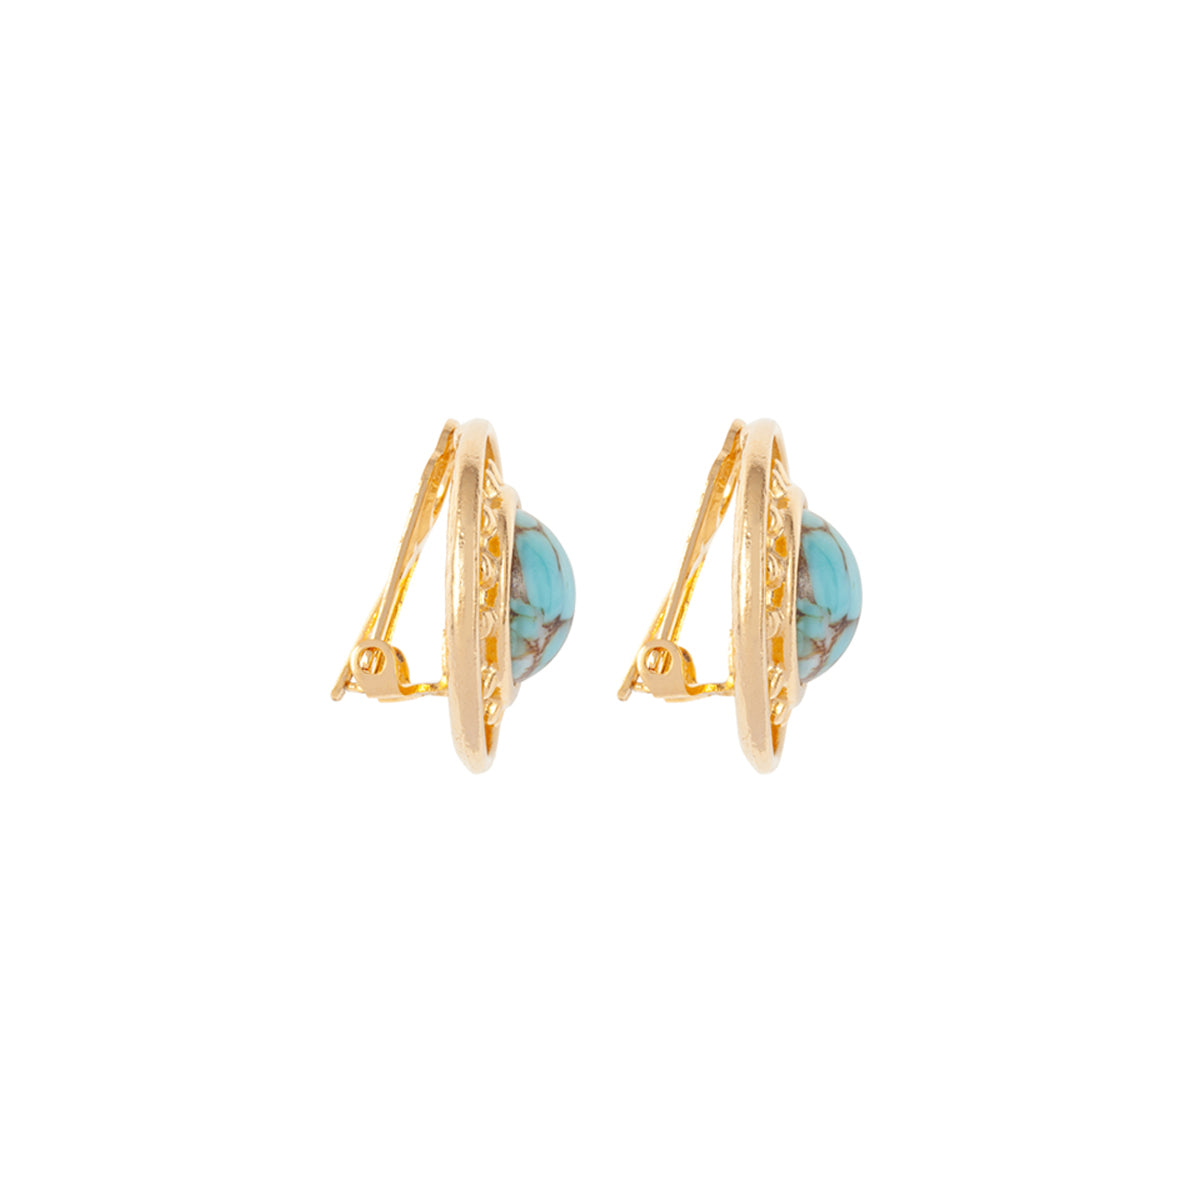 1980s Vintage Faux Turquoise Clip-On Earrings